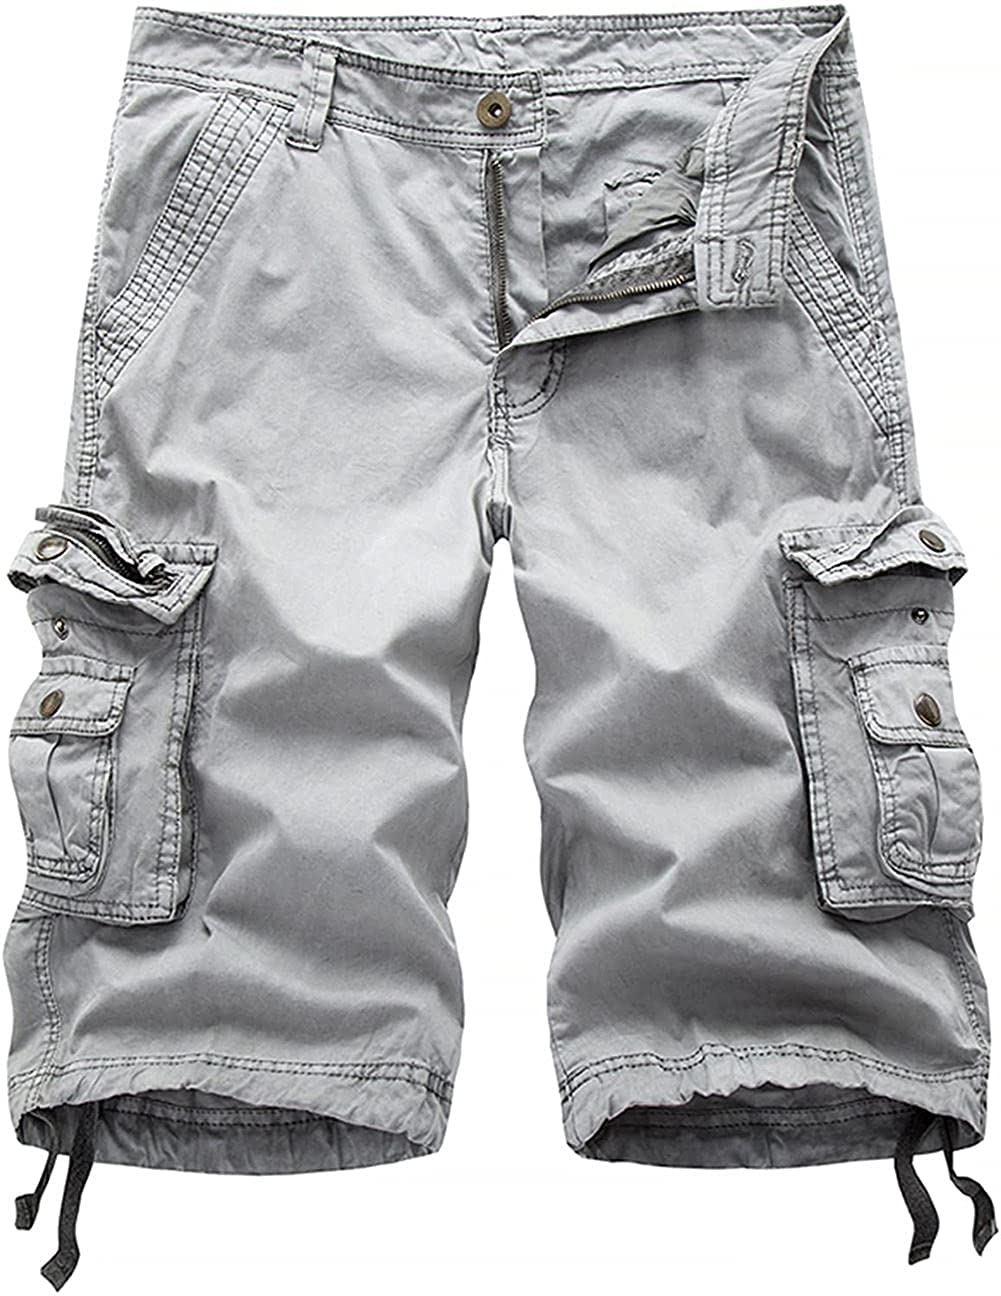 GOCHIC Men's Relaxed Fit Cargo Shorts with Multi Pockets